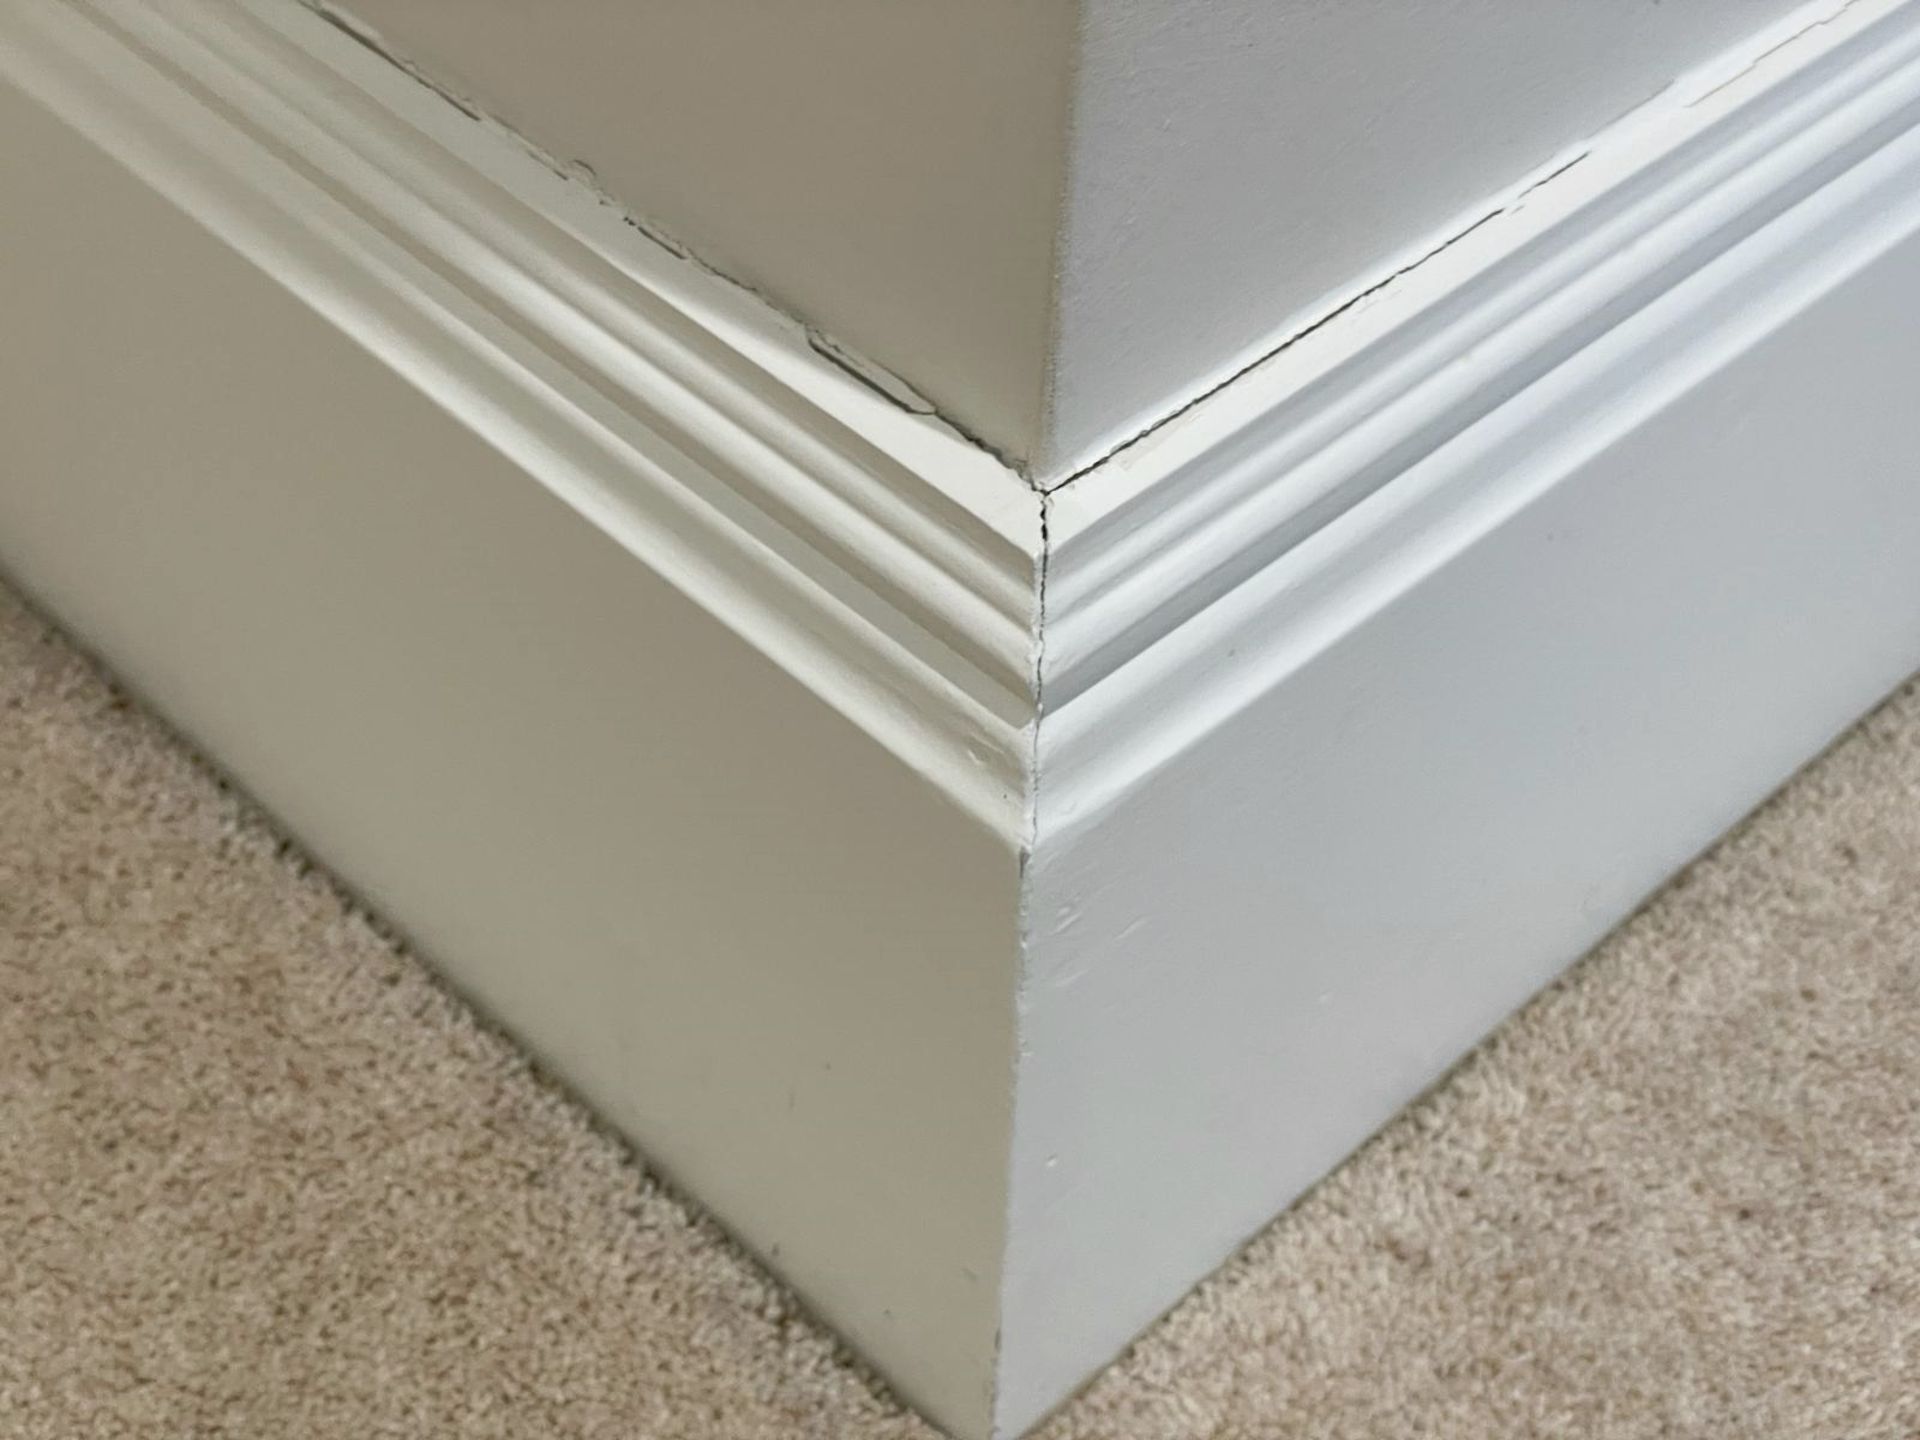 Approximately 12.5-Metres of Painted Timber Wooden Skirting Boards, In White - Ref: PAN254 - CL896 - - Image 2 of 5